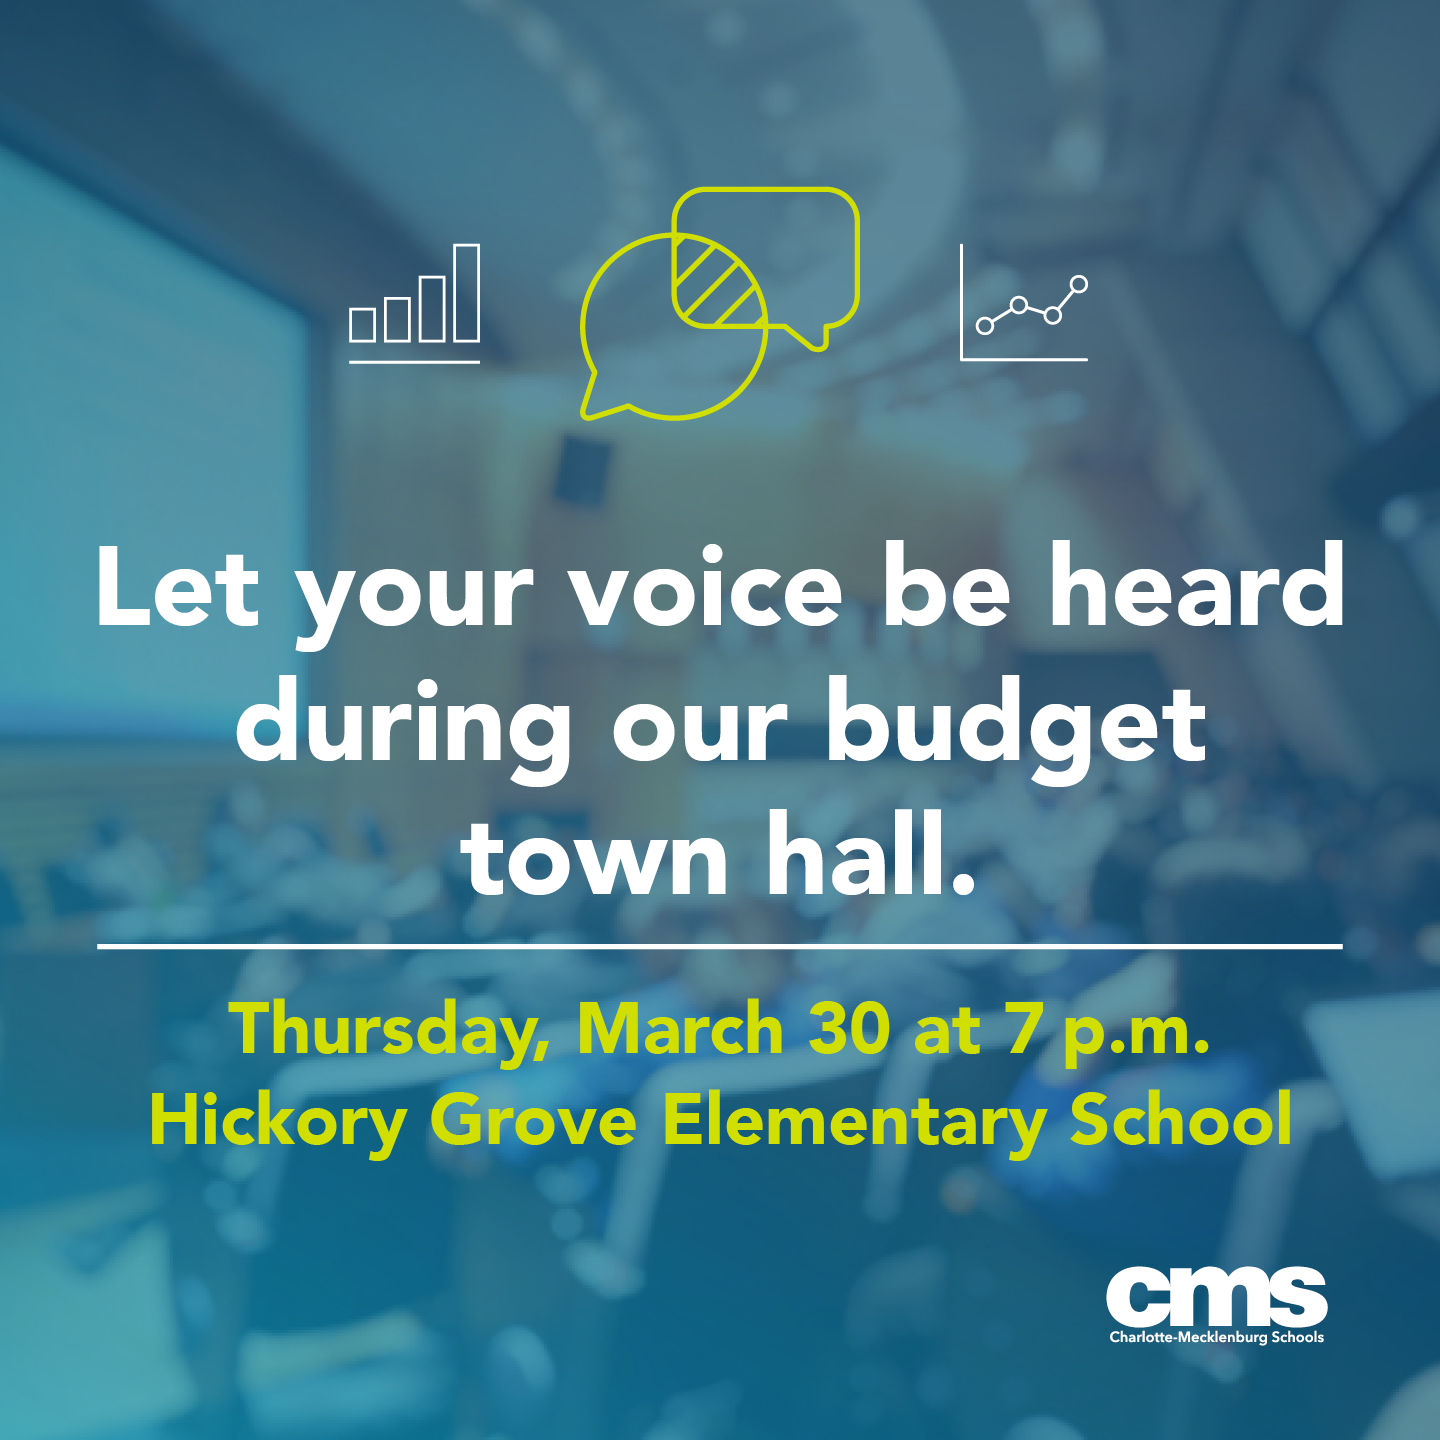  Upcoming budget town hall meeting Thursday, March 30, 7 p.m. at Hickory Grove Elementary School